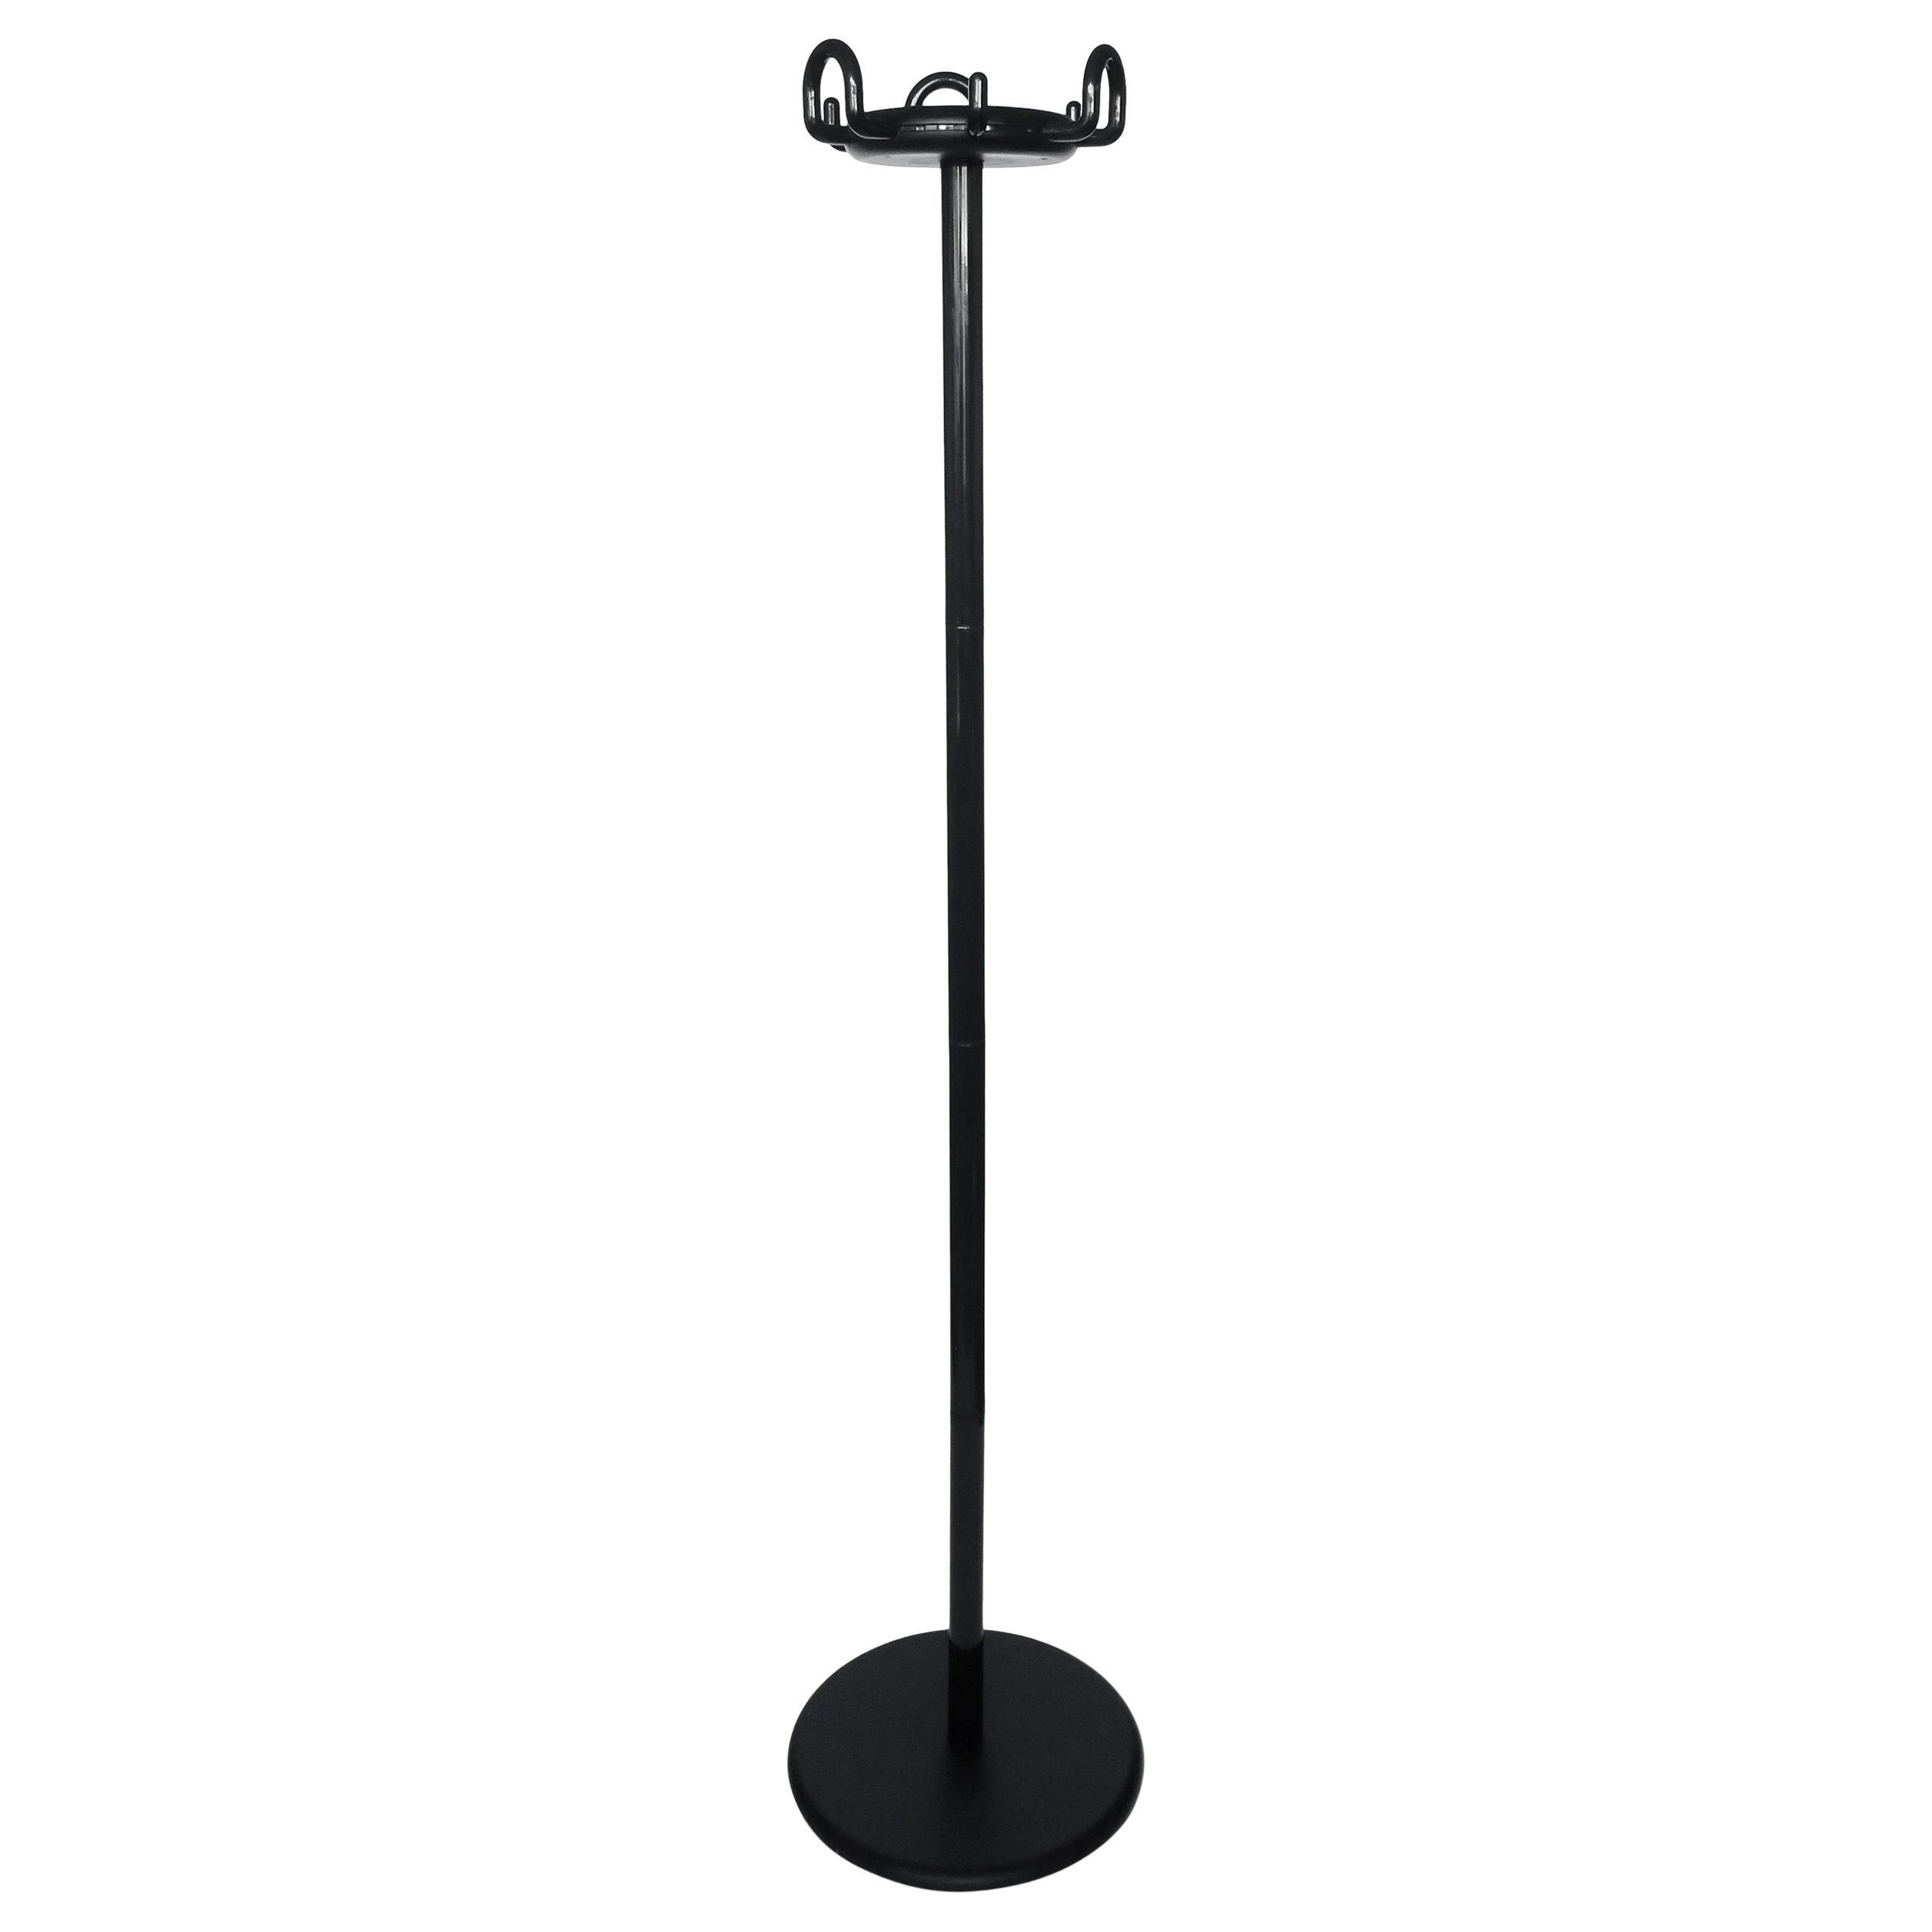 Black Aiuto Coat Rack by Barberi and Marianelli for Rexite